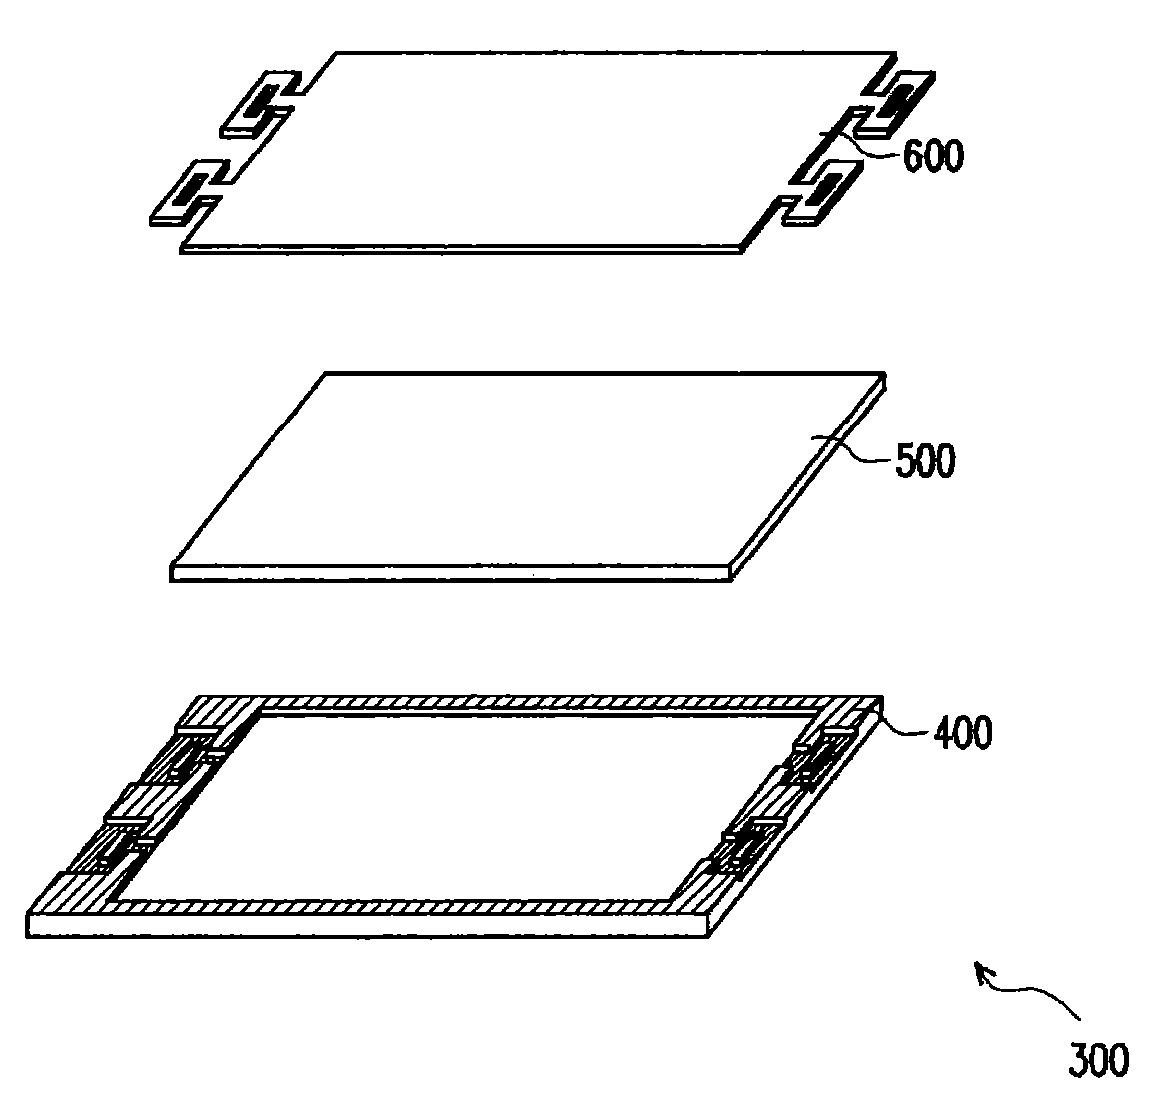 Frame structure, backlight module and display module